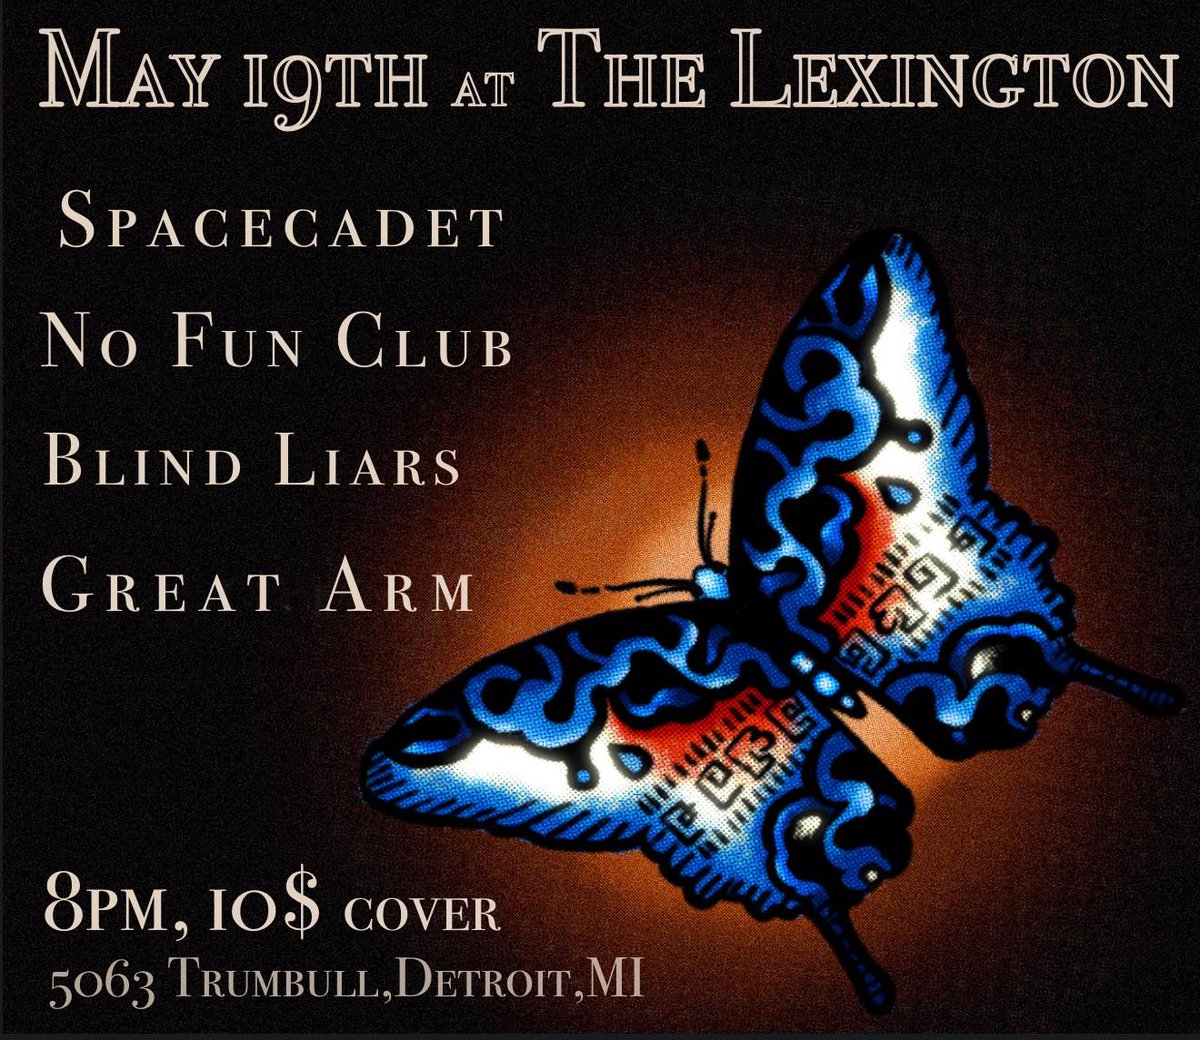 We're exteremely hyped to announced our return to Woodbridge's premier evening refresher: The
Lexington!

Now with extra friends: No Fun Club, Spacecadet and
Great Arm!

#indierock
#supportlocalbands #craftbeer
 #detroitmusic #alternativerock
#rockmusic #whiskeybar